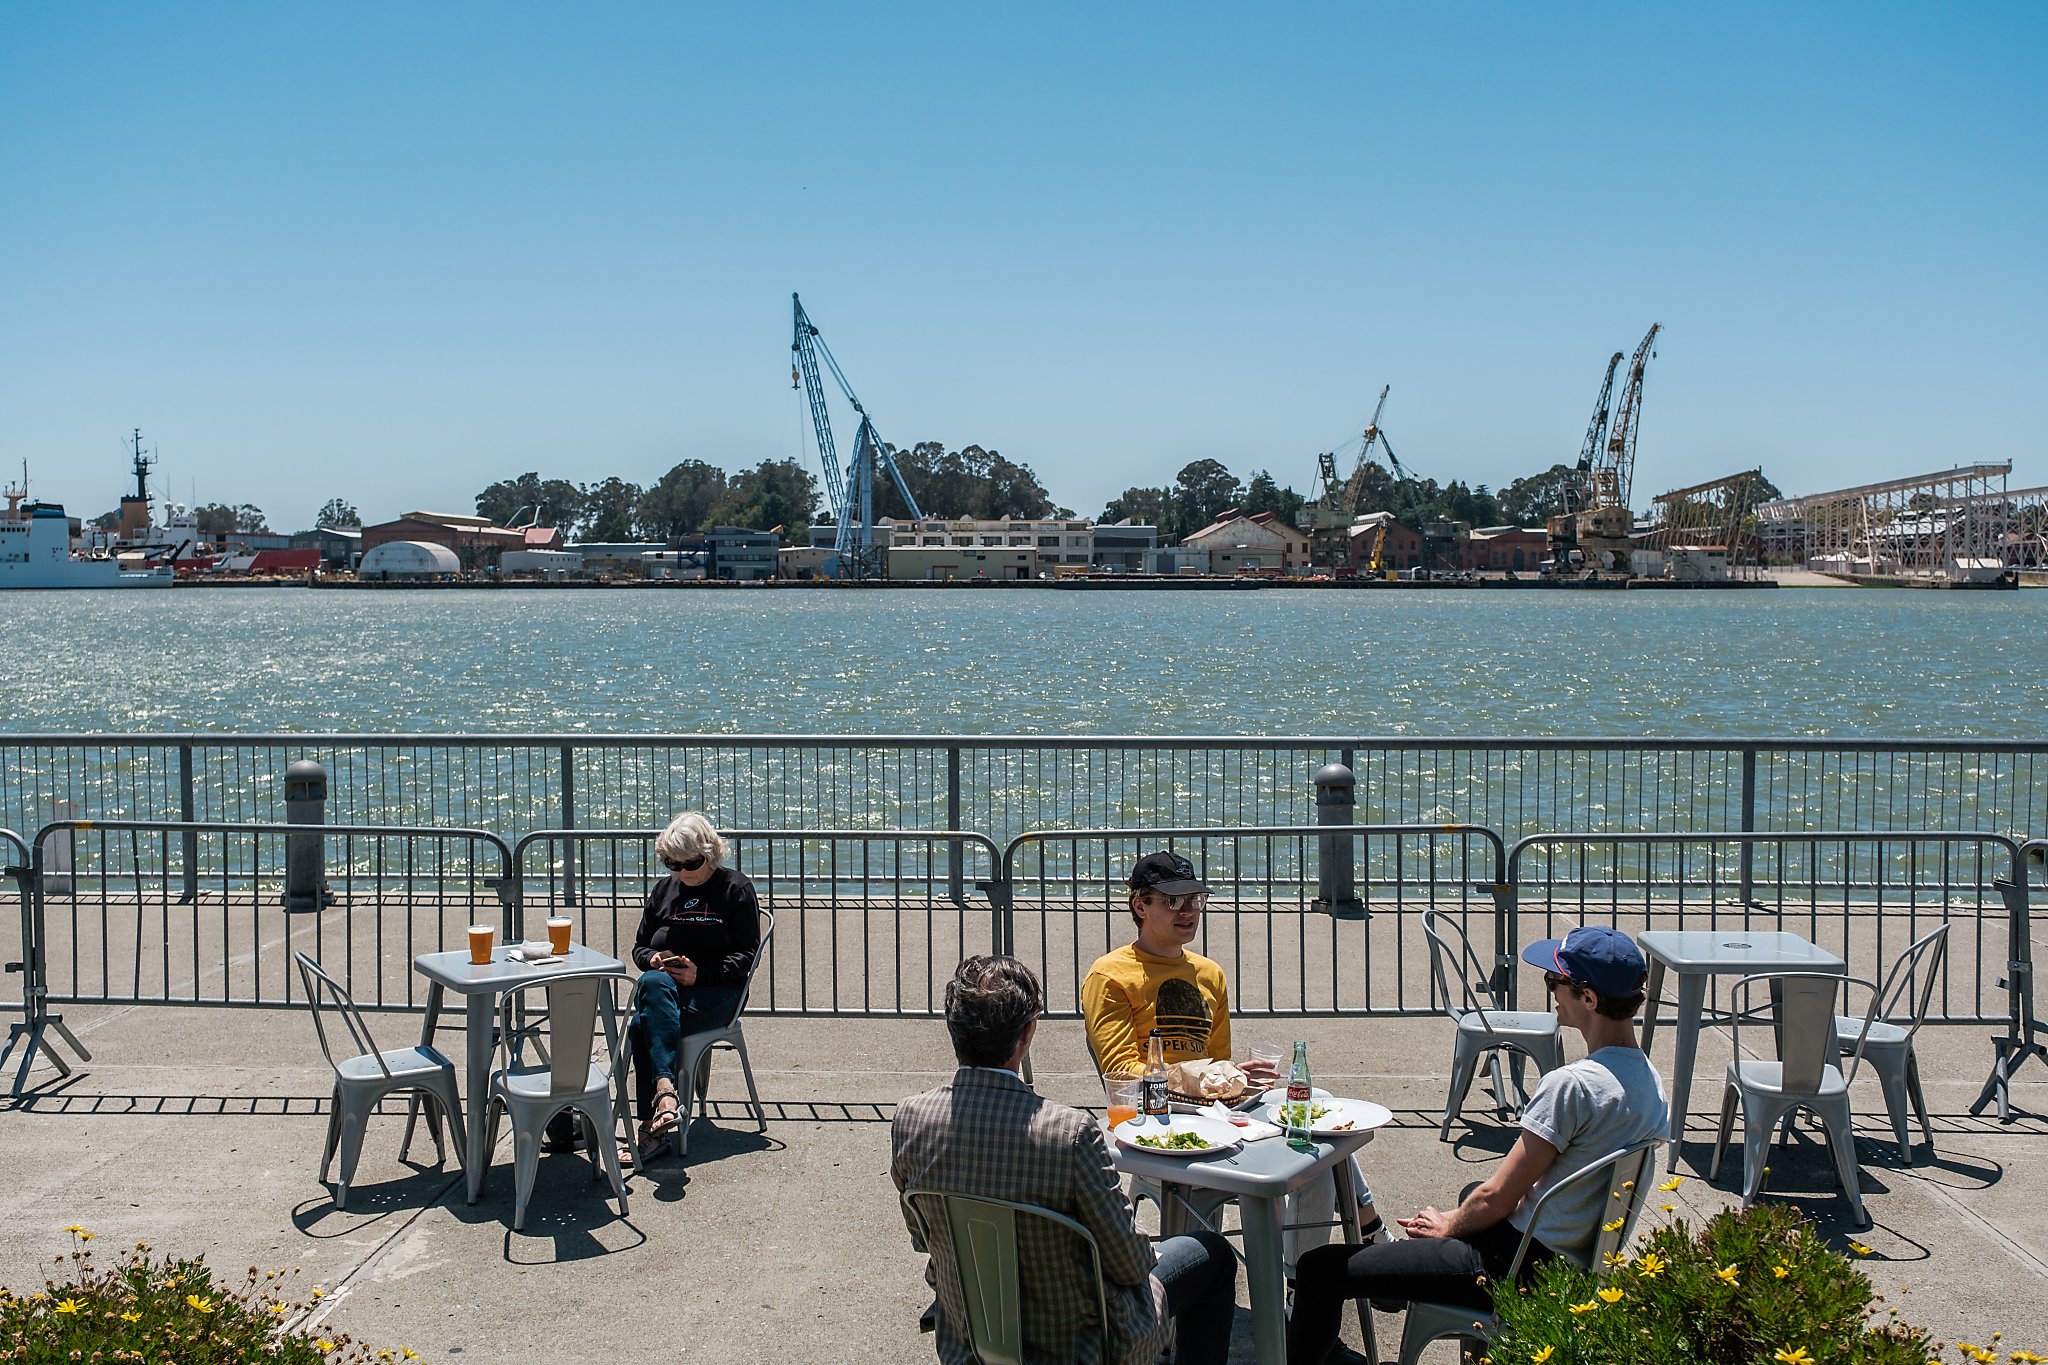 13 scenic waterfront restaurants open in the Bay Area for dining with a